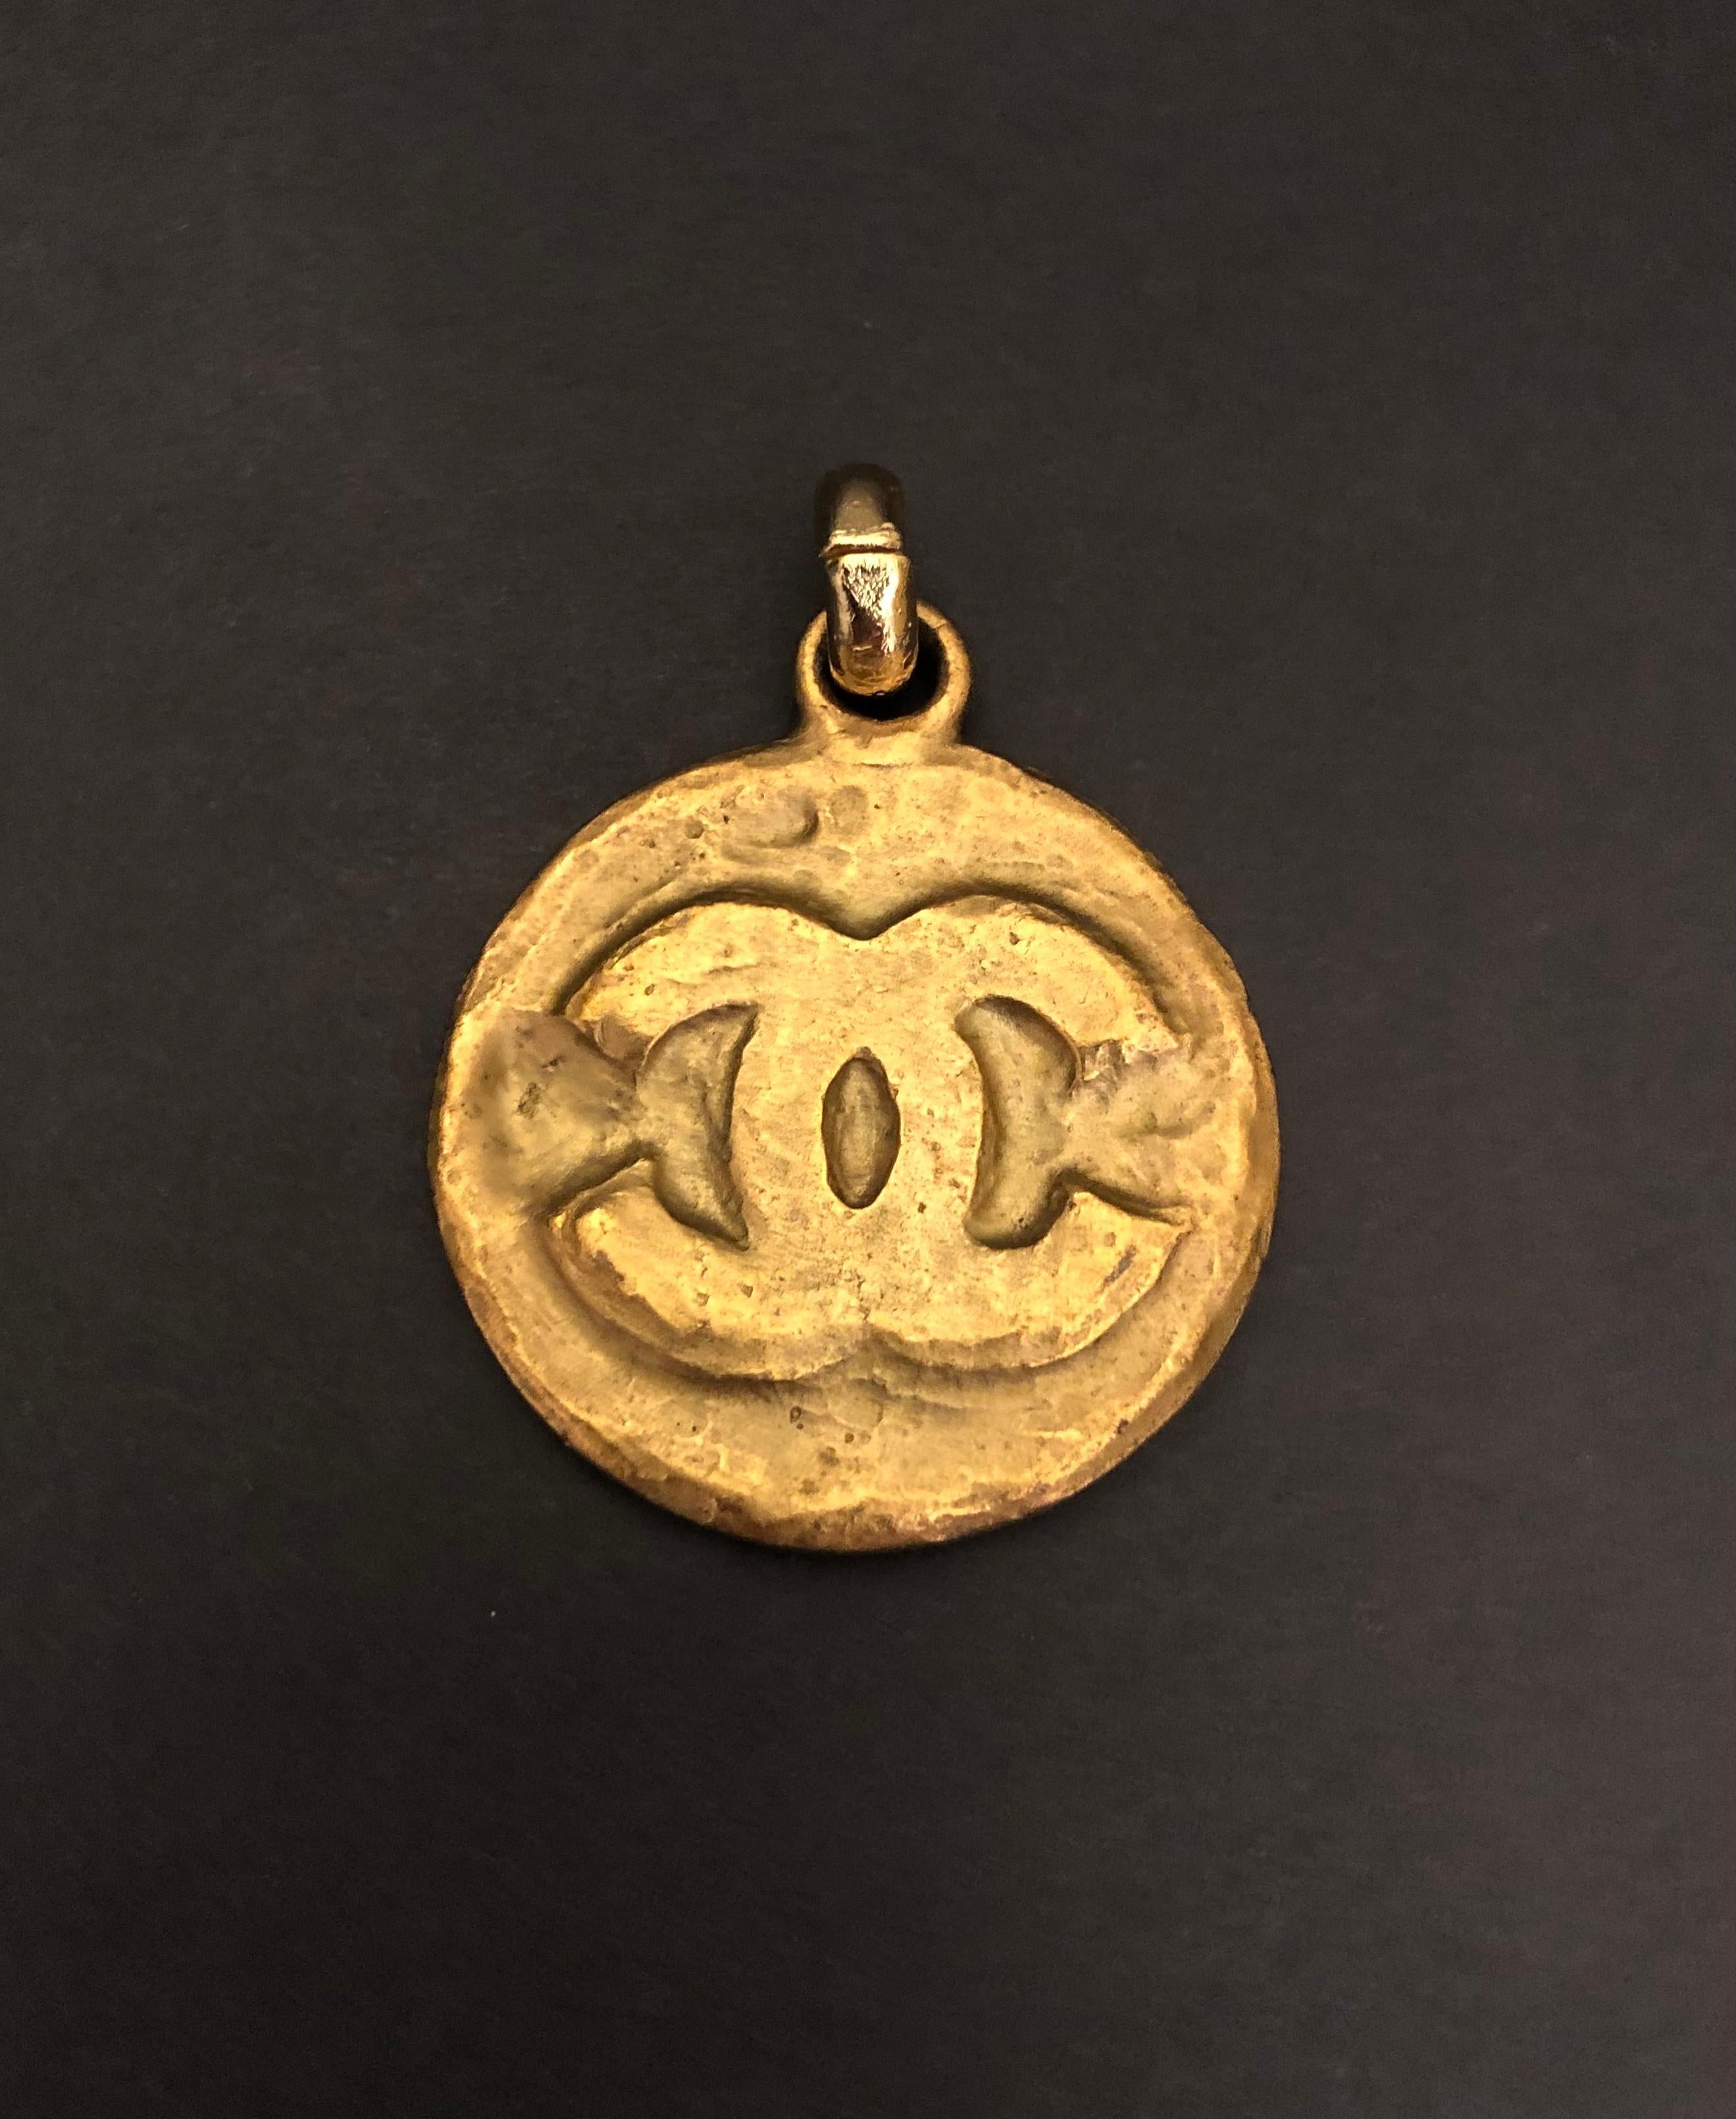 This vintage CHANEL gold toned CC medallion charm that was part of a vintage CHANEL keychain is crafted of gold toned metal in Byzantine style. Measures approximately 4 x 4.7 cm. This charm can be secured on a gold toned chain or pearl necklace as a